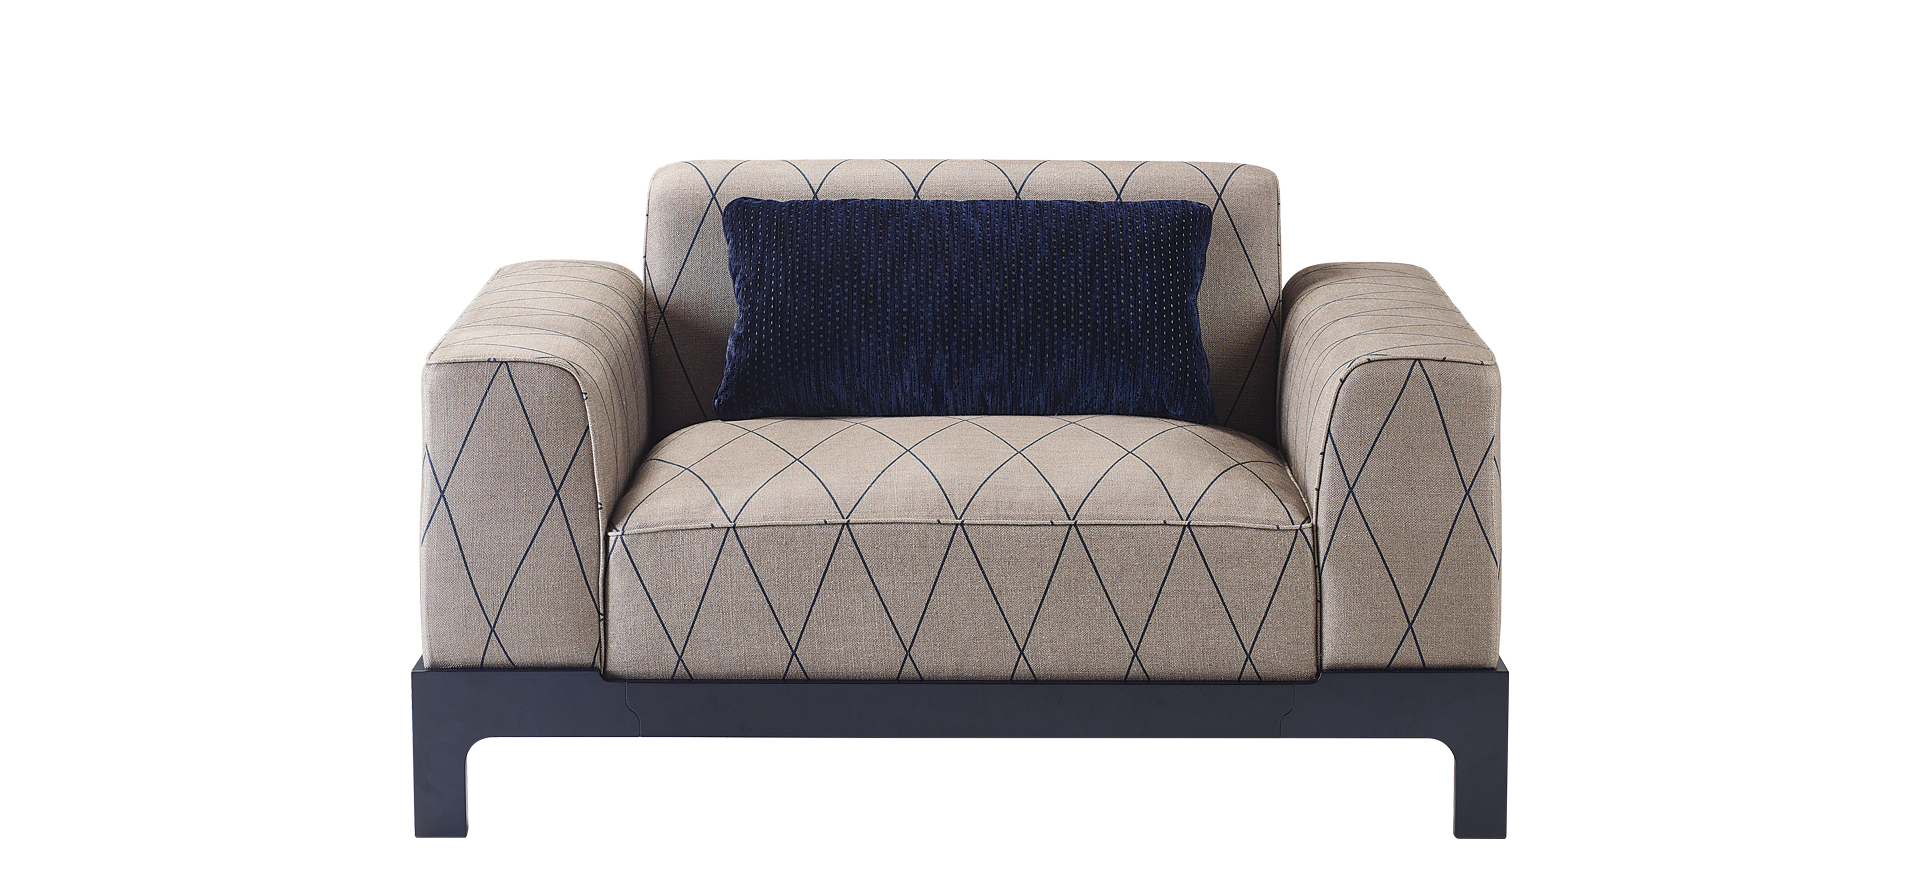 Pullman is a wooden sofa with fabric covering and cushions, from Promemoria's Indigo Tales collection | Promemoria